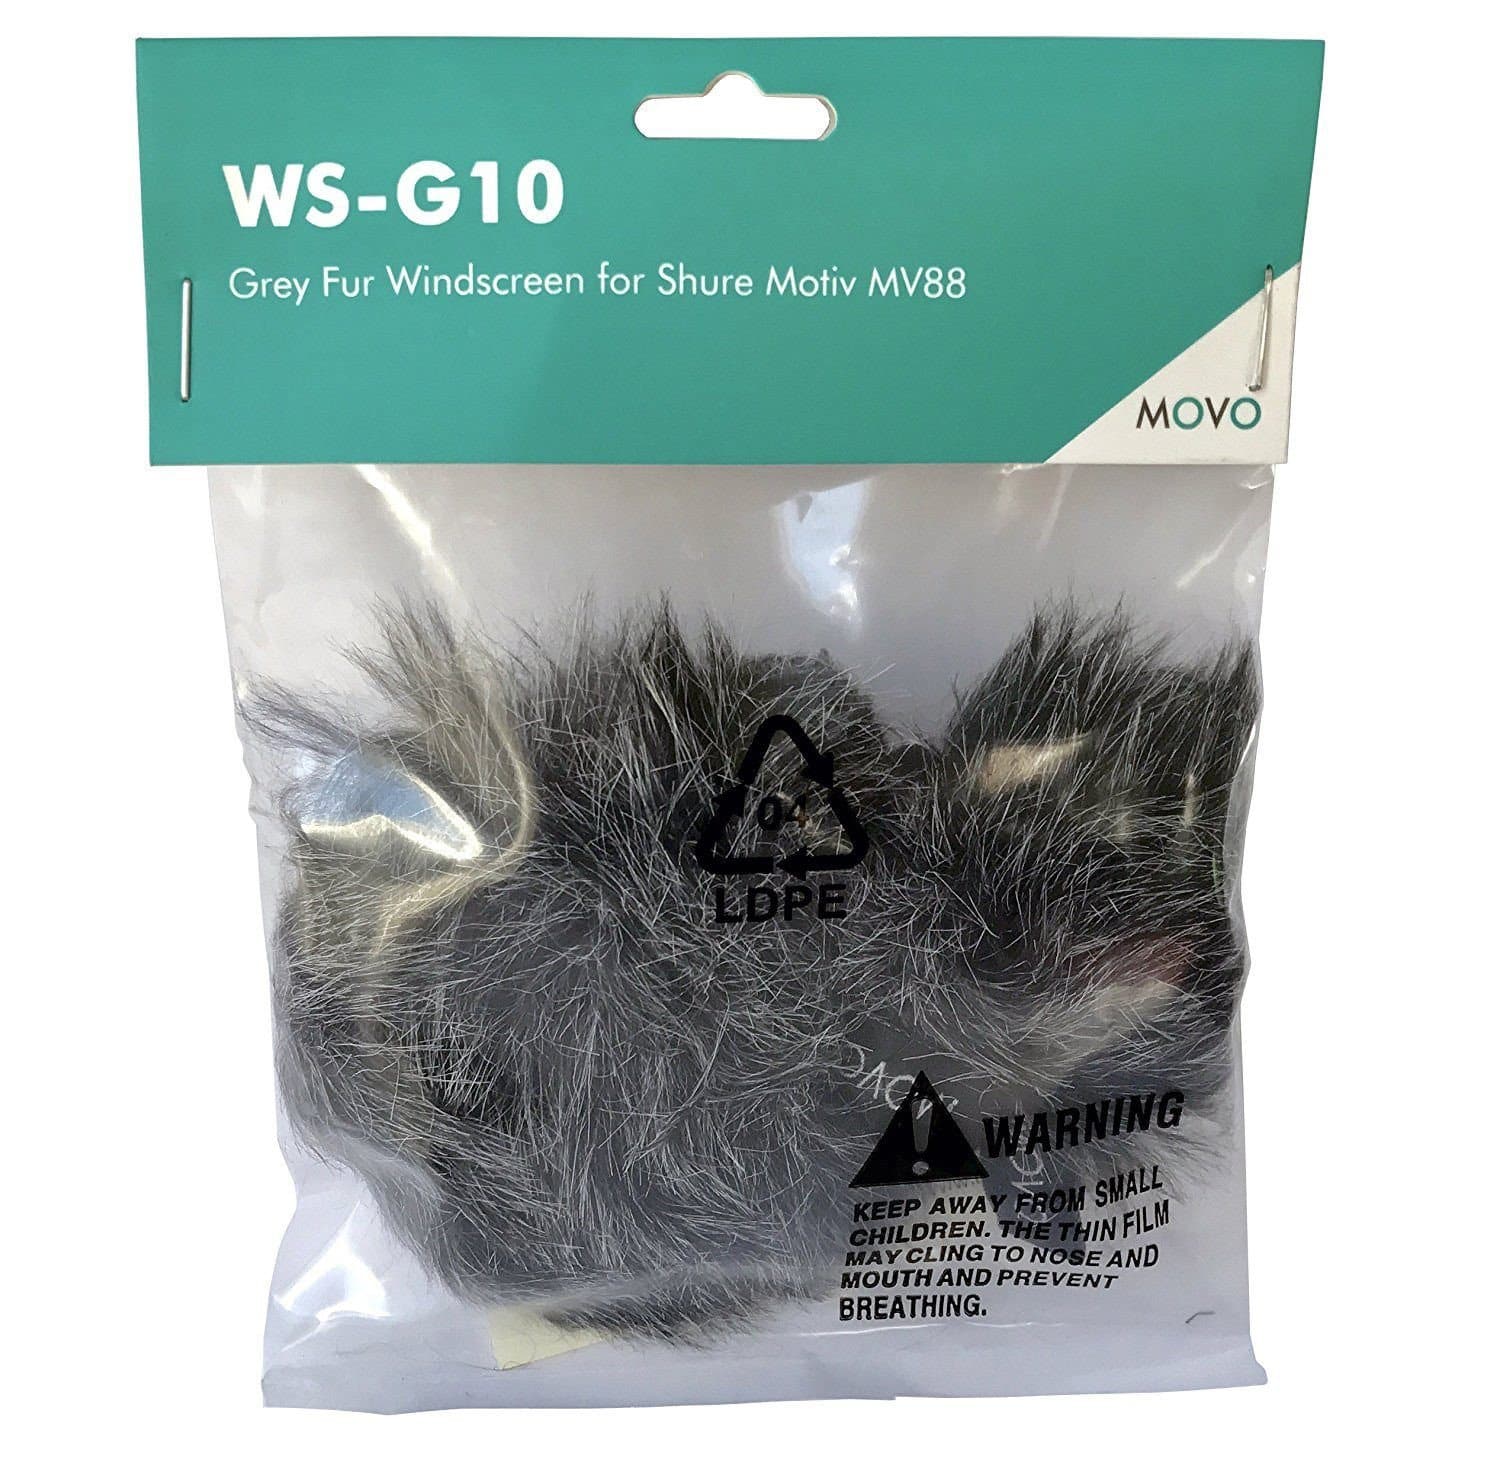 Microphone Windscreen for MV88 Shure Microphones | WS-G10 | Movo - Movo